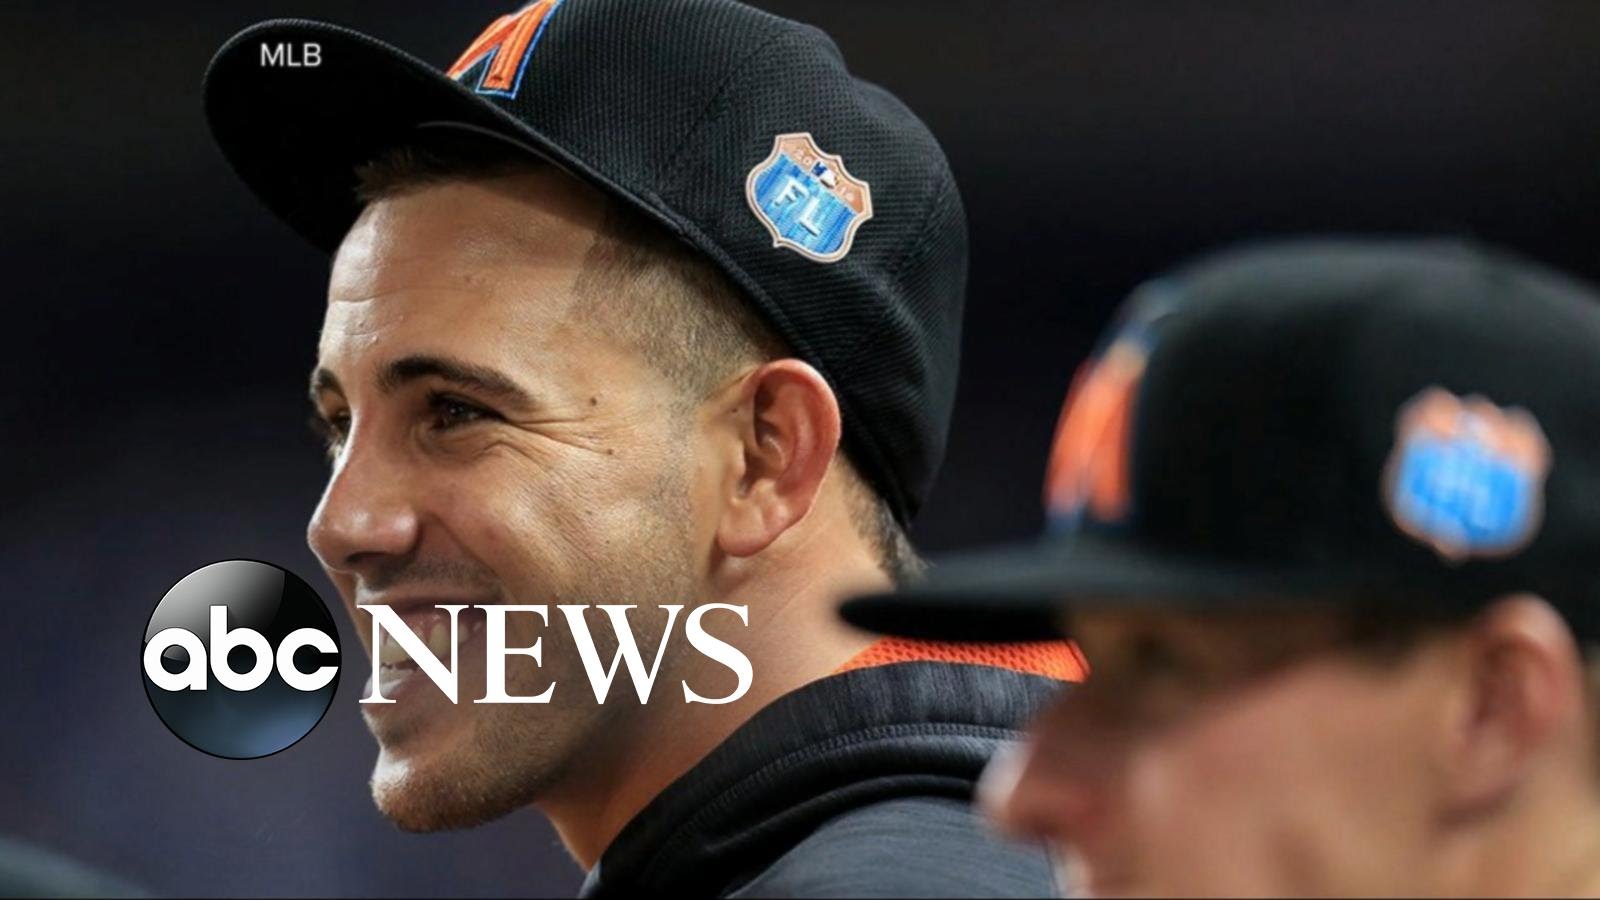 Jose Fernandez has died tragically in a boating accident